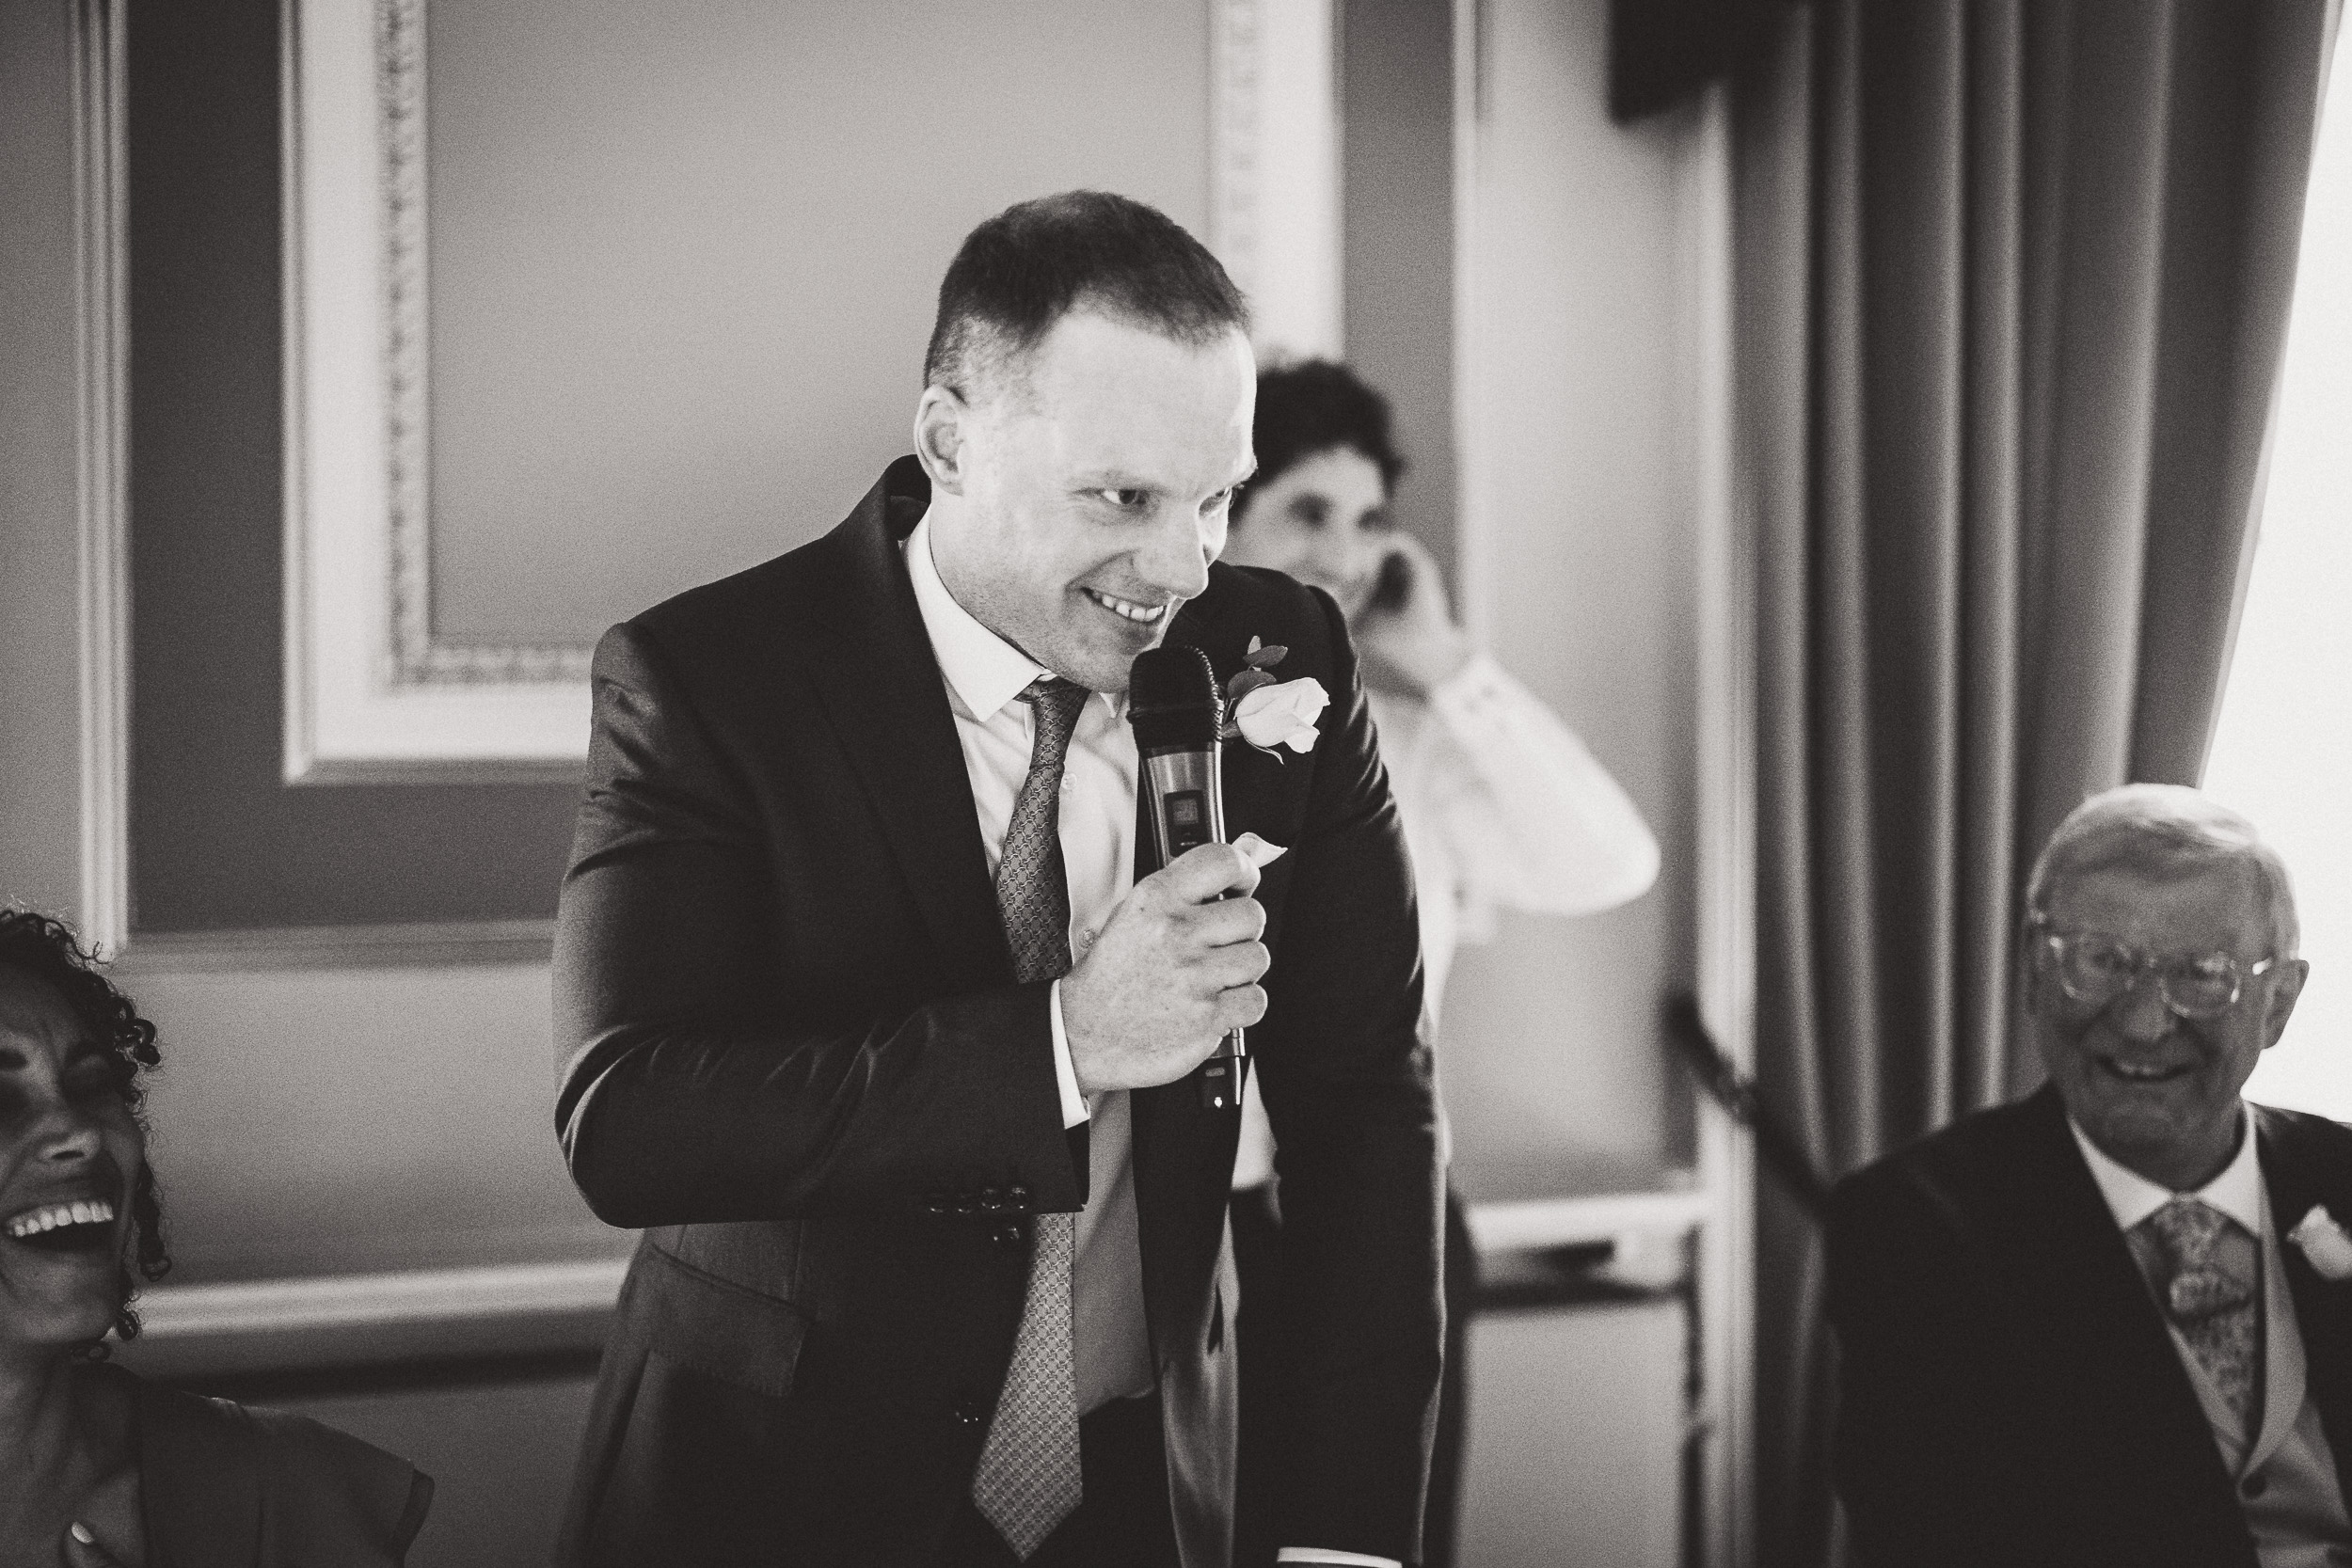 A black and white photo of a man speaking into a microphone at a wedding.